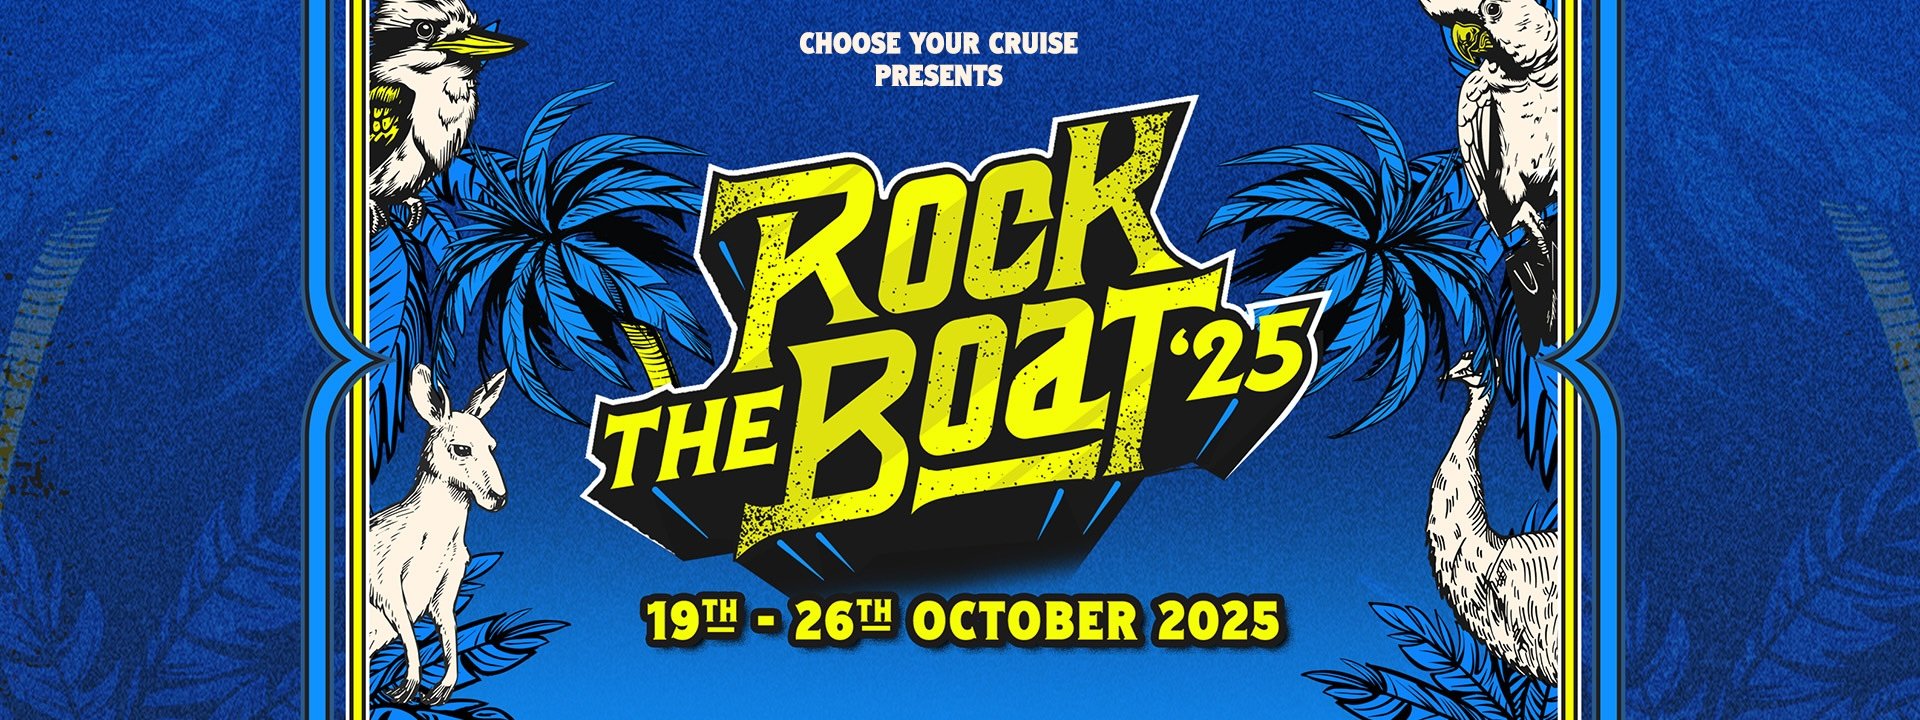 Rock The Boat 2025